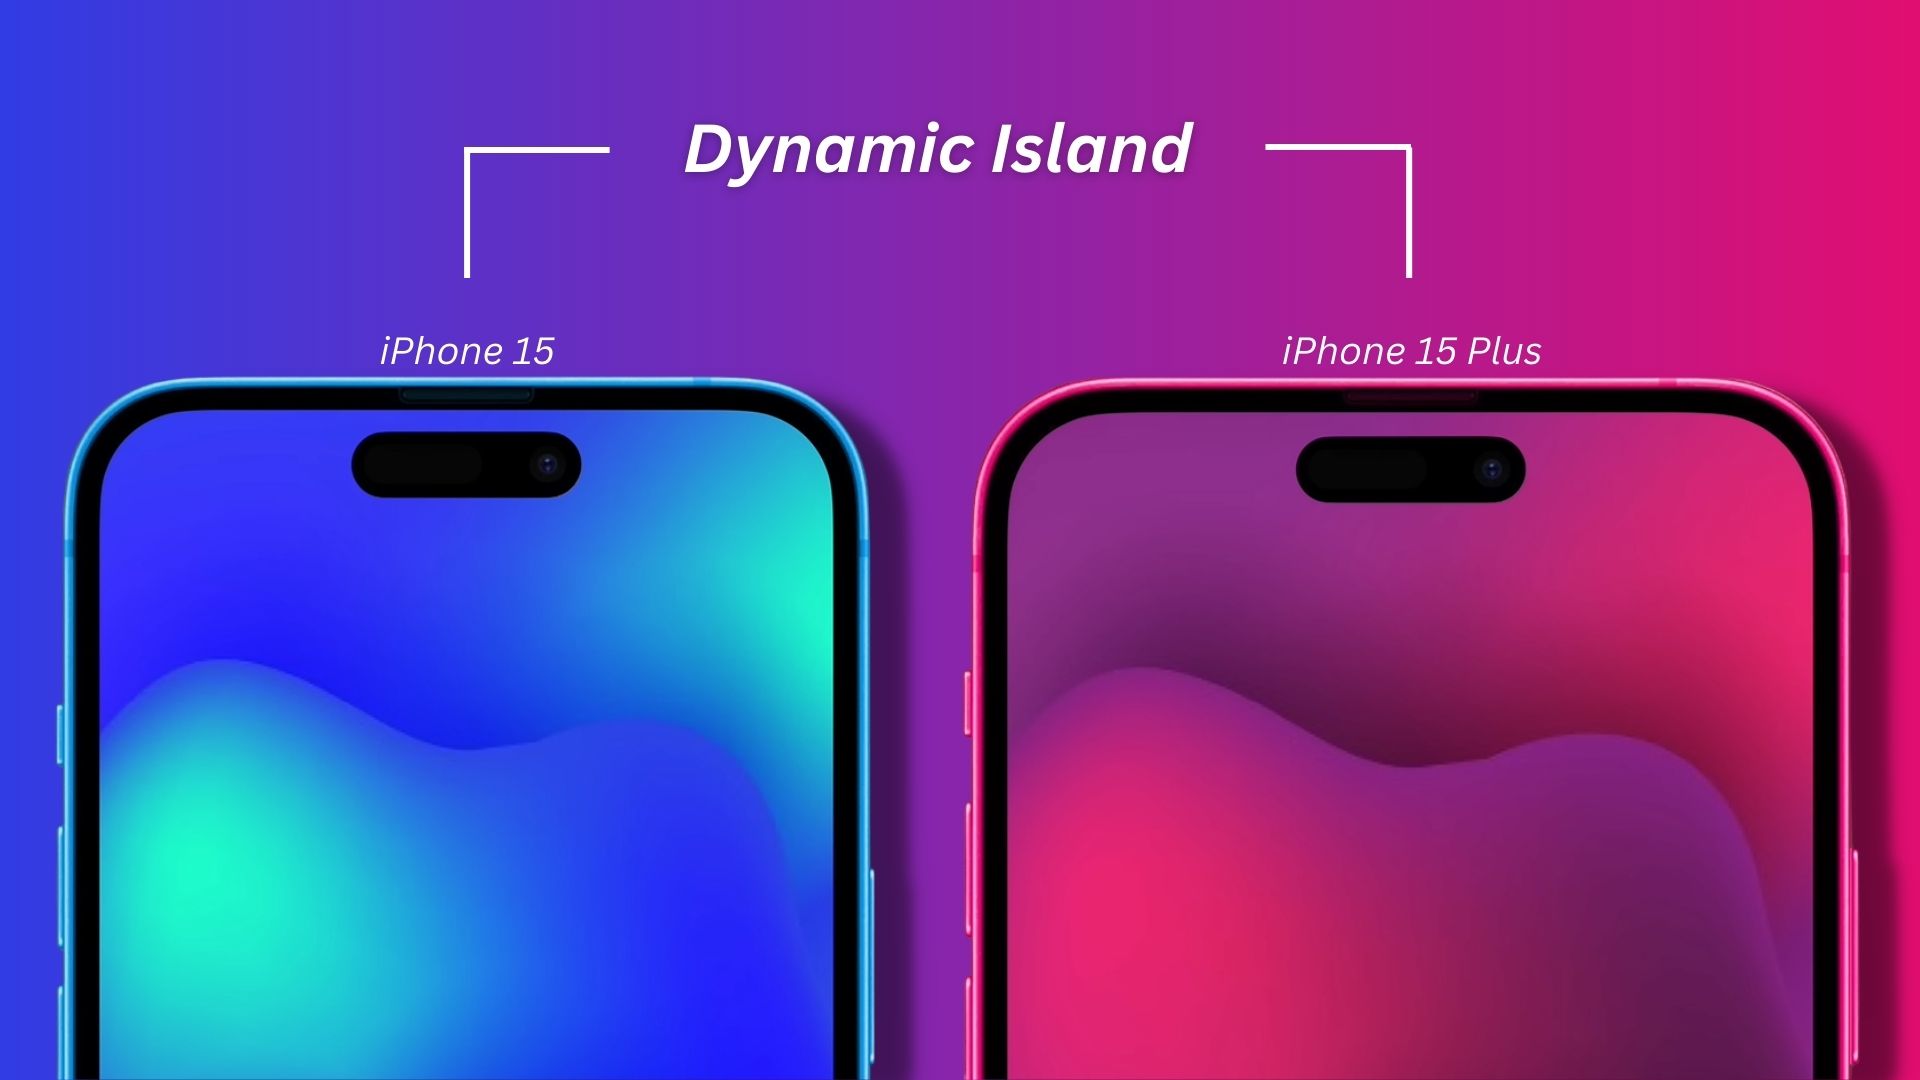 iPhone 15 with Dynamic island